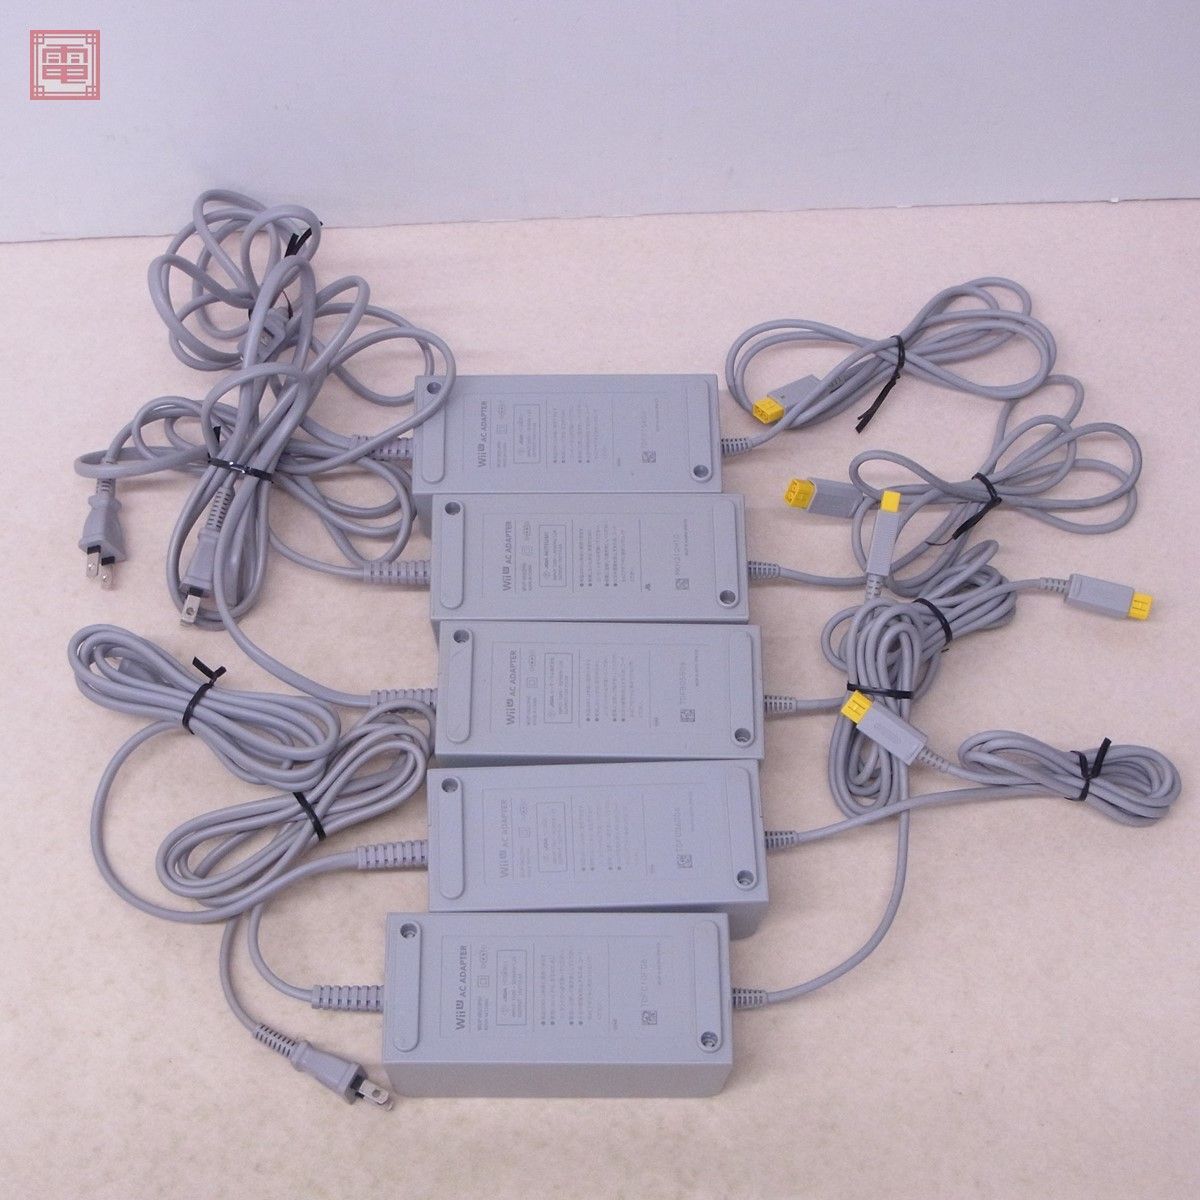 WiiU AC adapter WUP-002 10 piece + game pad AC adapter WUP-011 10 piece together 20 piece set nintendo Nintendo[20